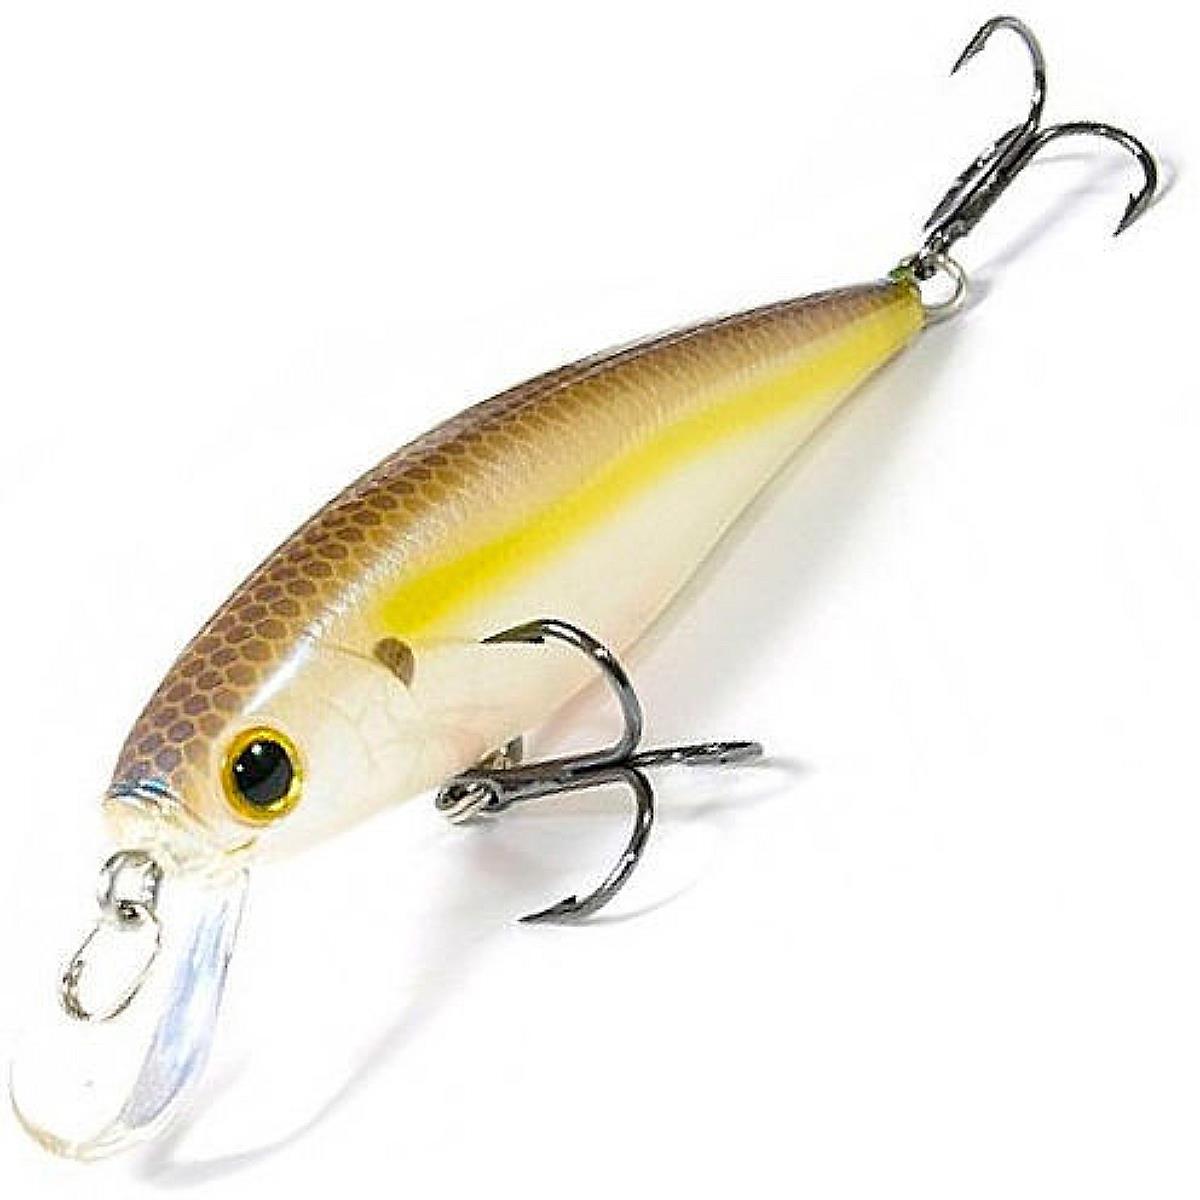 Воблер Pointer 78-250 Chartreuse Shad Lucky Craft